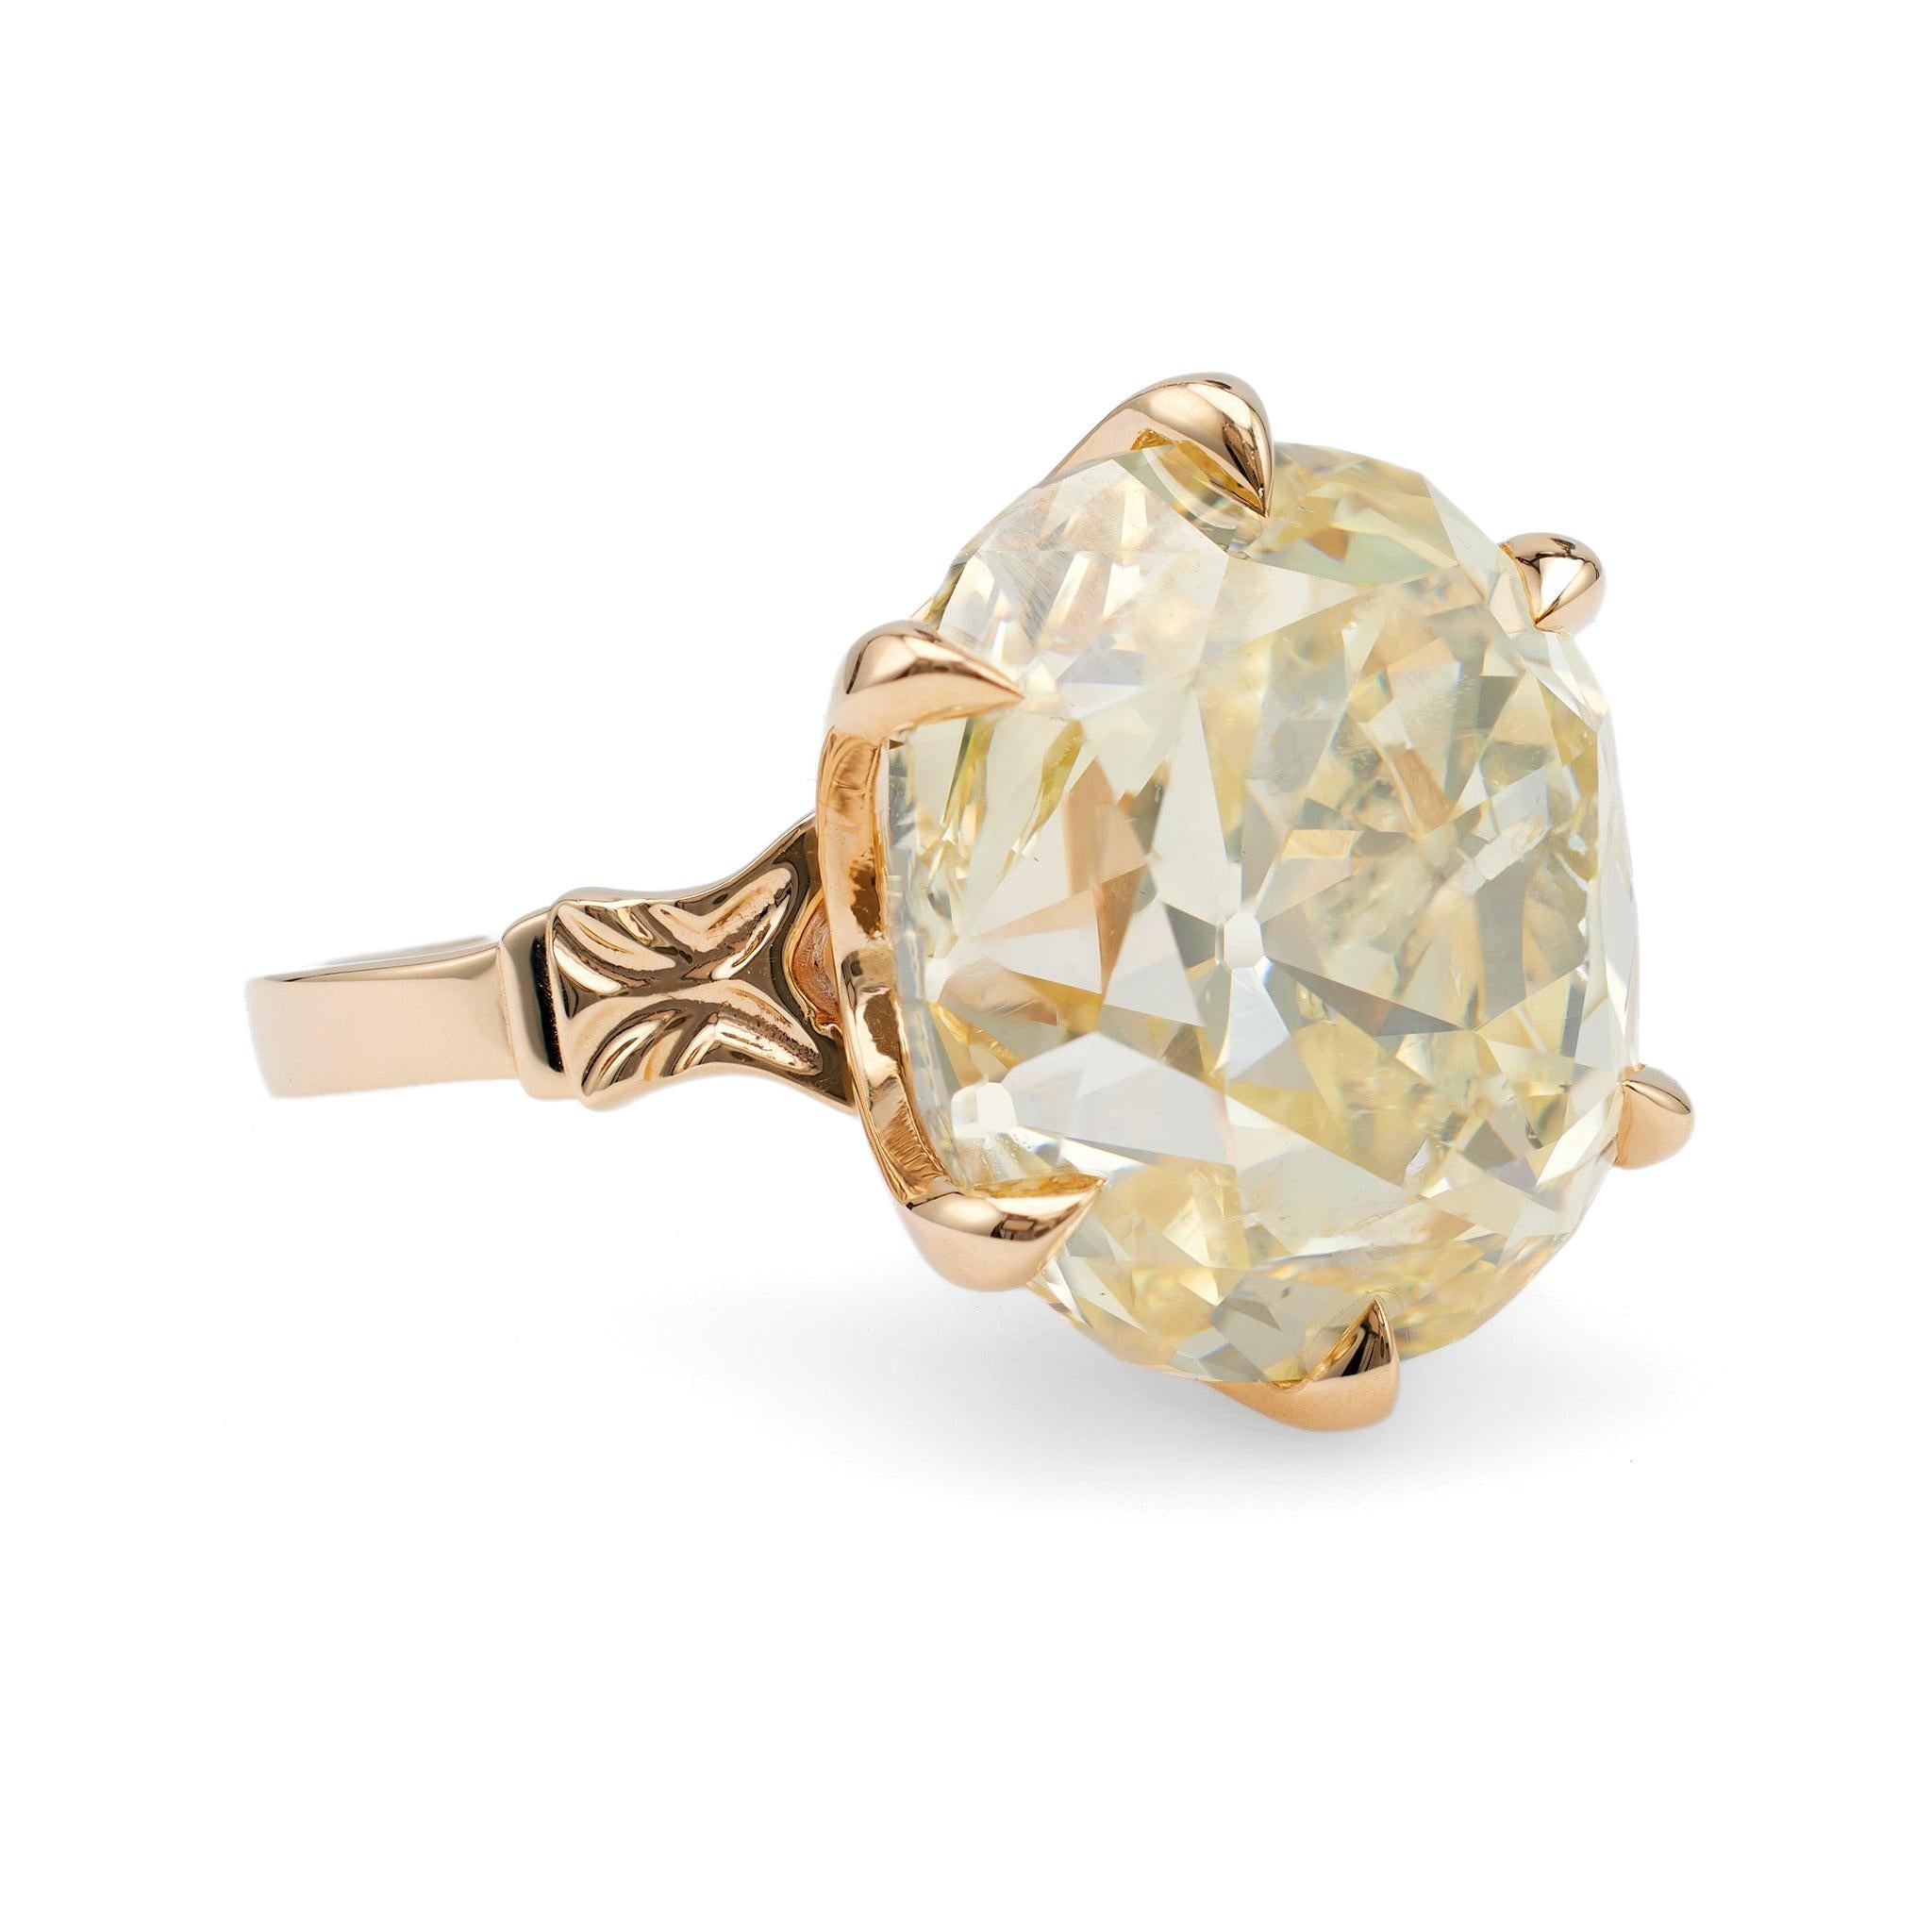 Edwardian GIA 15.77 Carat Old Mine Cut Diamond 14k Yellow Gold Solitaire Ring  Jack Weir & Sons   